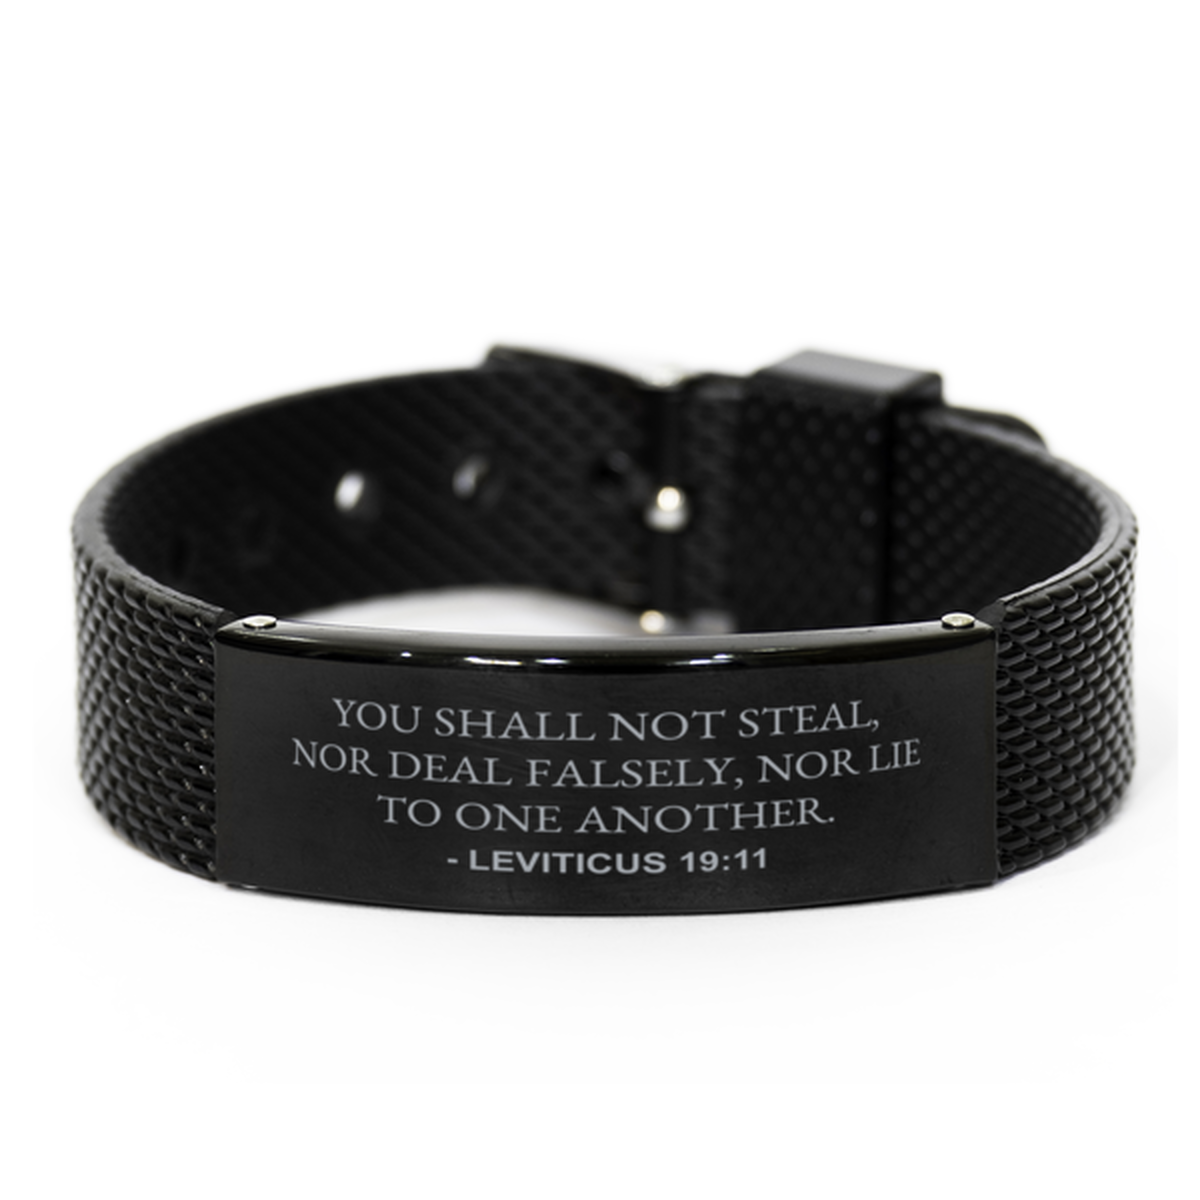 Christian Black Bracelet,, Leviticus 19:11 You Shall Not Steal, Nor Deal Falsely, Nor Lie To, Motivational Bible Verse Gifts For Men Women